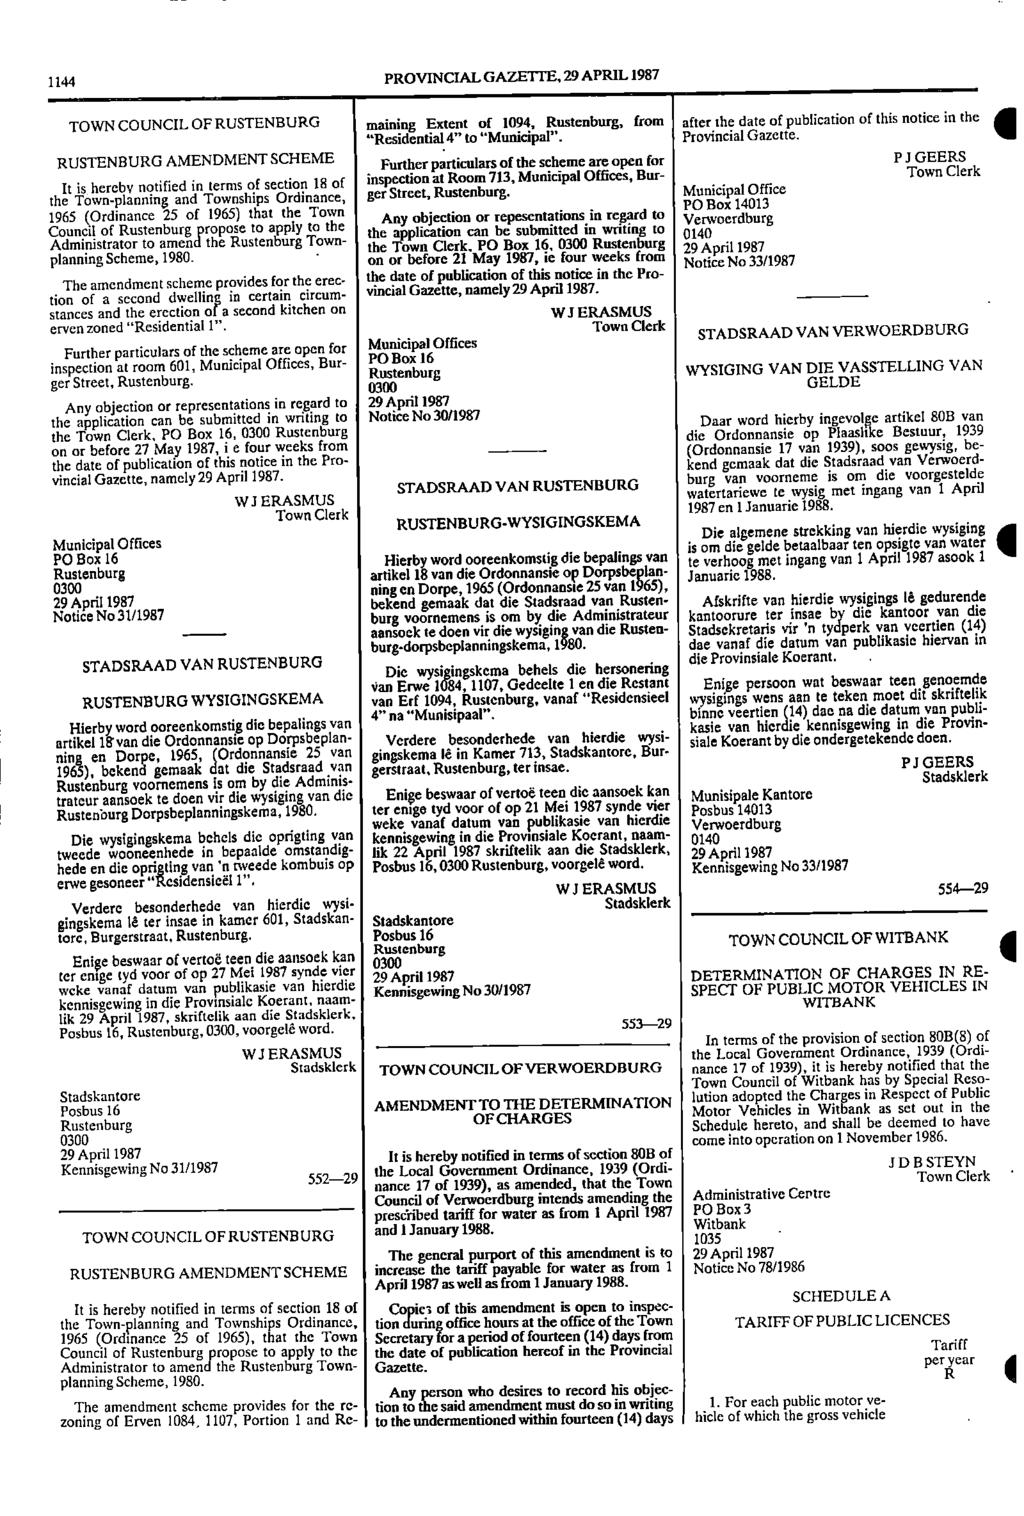 PROVNCAL GAZETTE, 29 APRL 987 TOWN COUNCL OF RUSTENBURG maining Extent of 09, Rustenburg, from after the date of publication of this notice in the "Residential " to "Municipal" Provincial Gazette P J